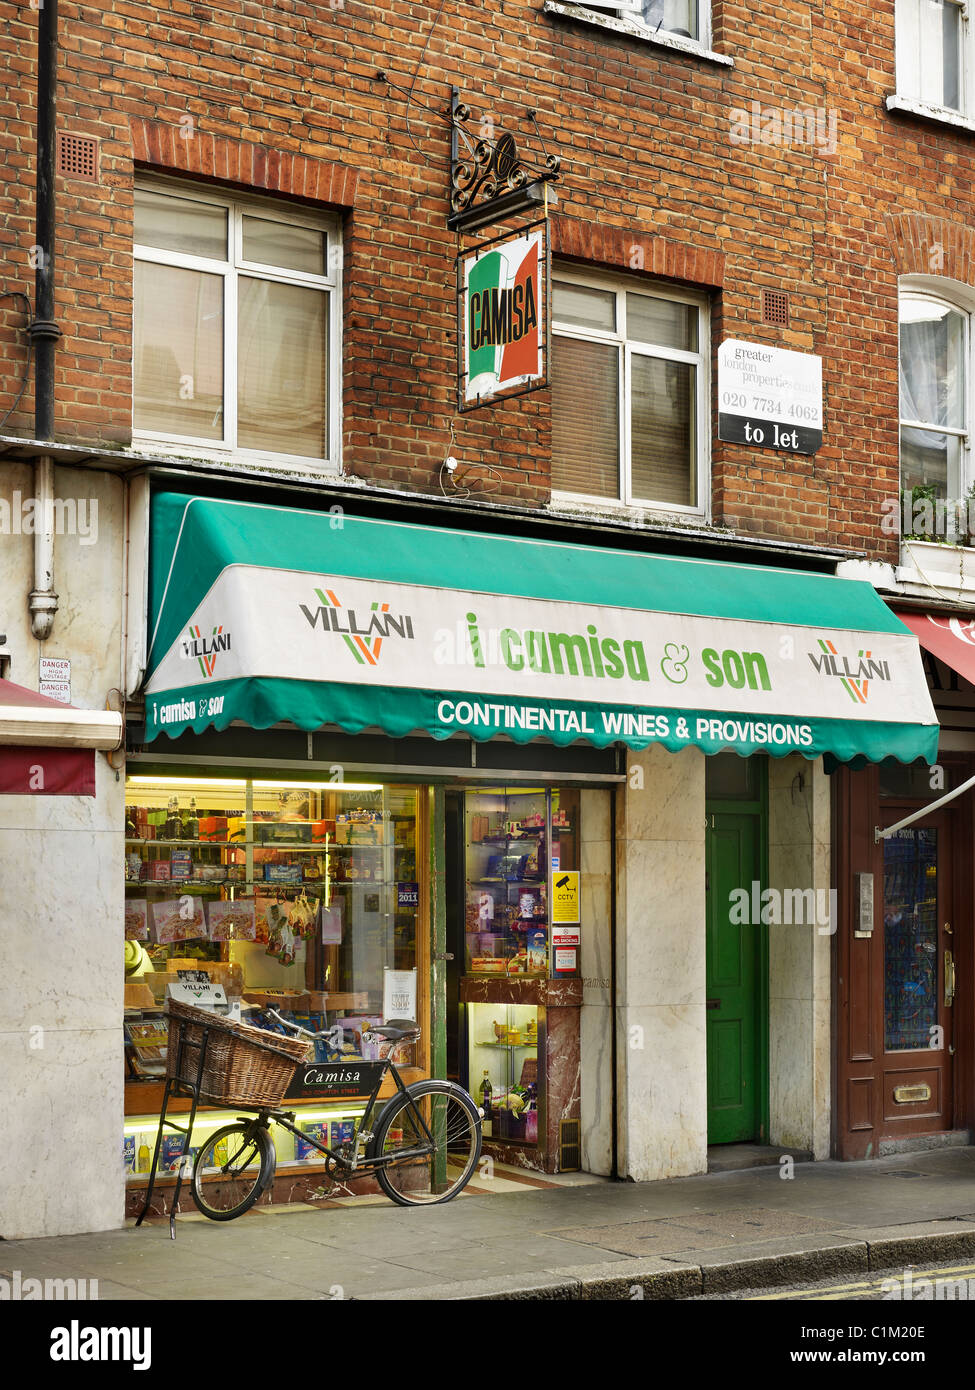 Camisa stores, Old Compton Street, Soho, London. Traditional Italian delicatessen with delivery bicycle. Stock Photo